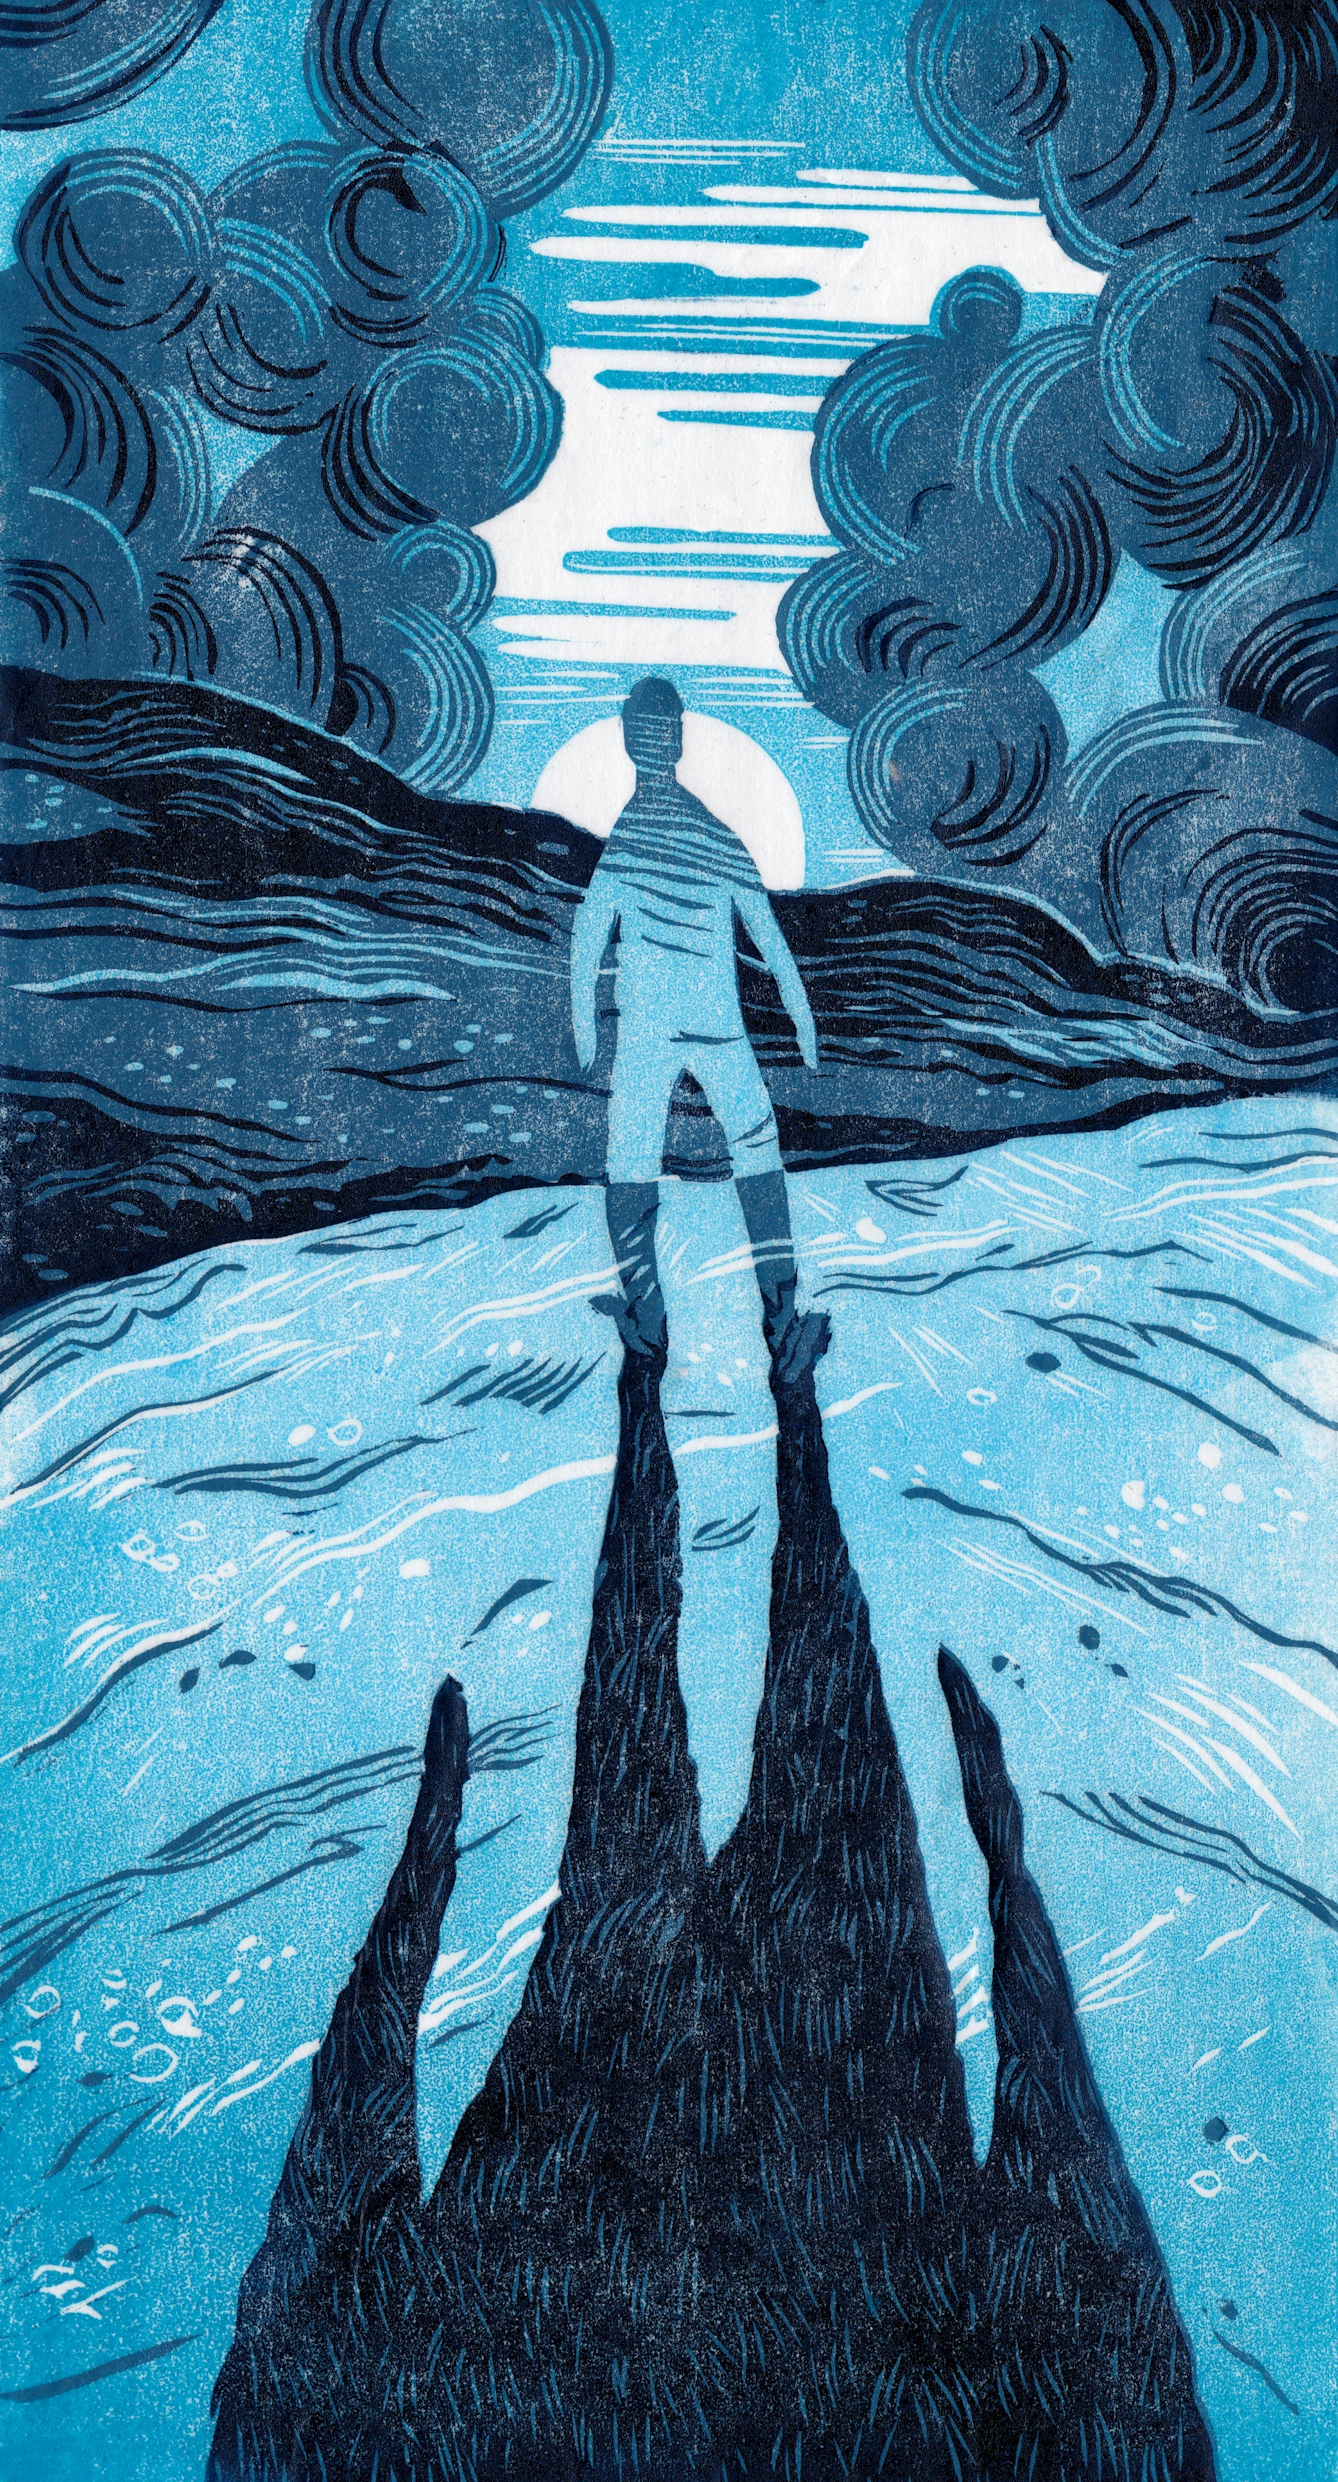 Digital copy of an original linocut artwork. The center shows a blue human outline standing. Stretching from their feet is their dark shadow, which is notably larger than the person. The ground the person is standing on is predominantly light blue, with navy and white brushstrokes. The background consists of black, white and varying shades of blue brushstroke-style patterns that look like clouds. Directly behind the person is a white circle resembling a sunset. 